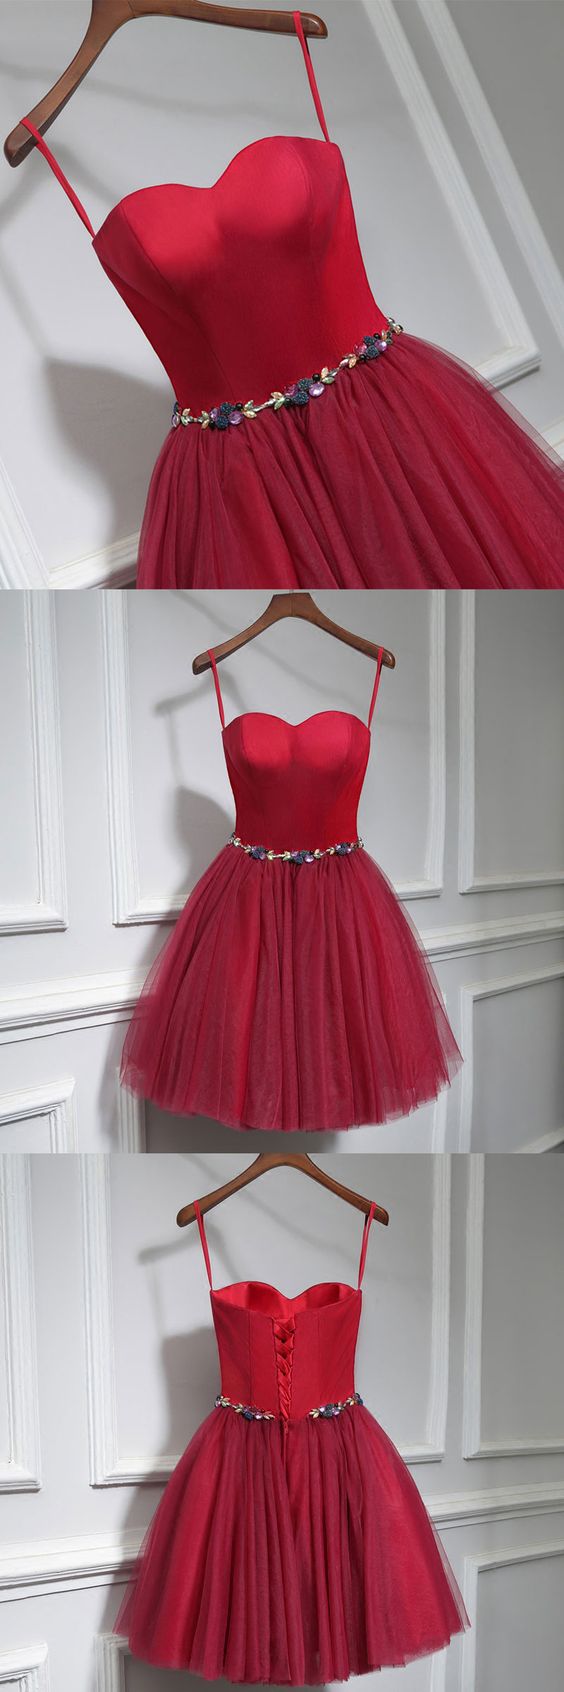 Cute Burgundy Neck Short Prom Dress, Homecoming Dress ,2018 Plus Size Tulle Short Cocktail Dresses, Girls Wedding Gowns ,wedding Guest Gowns